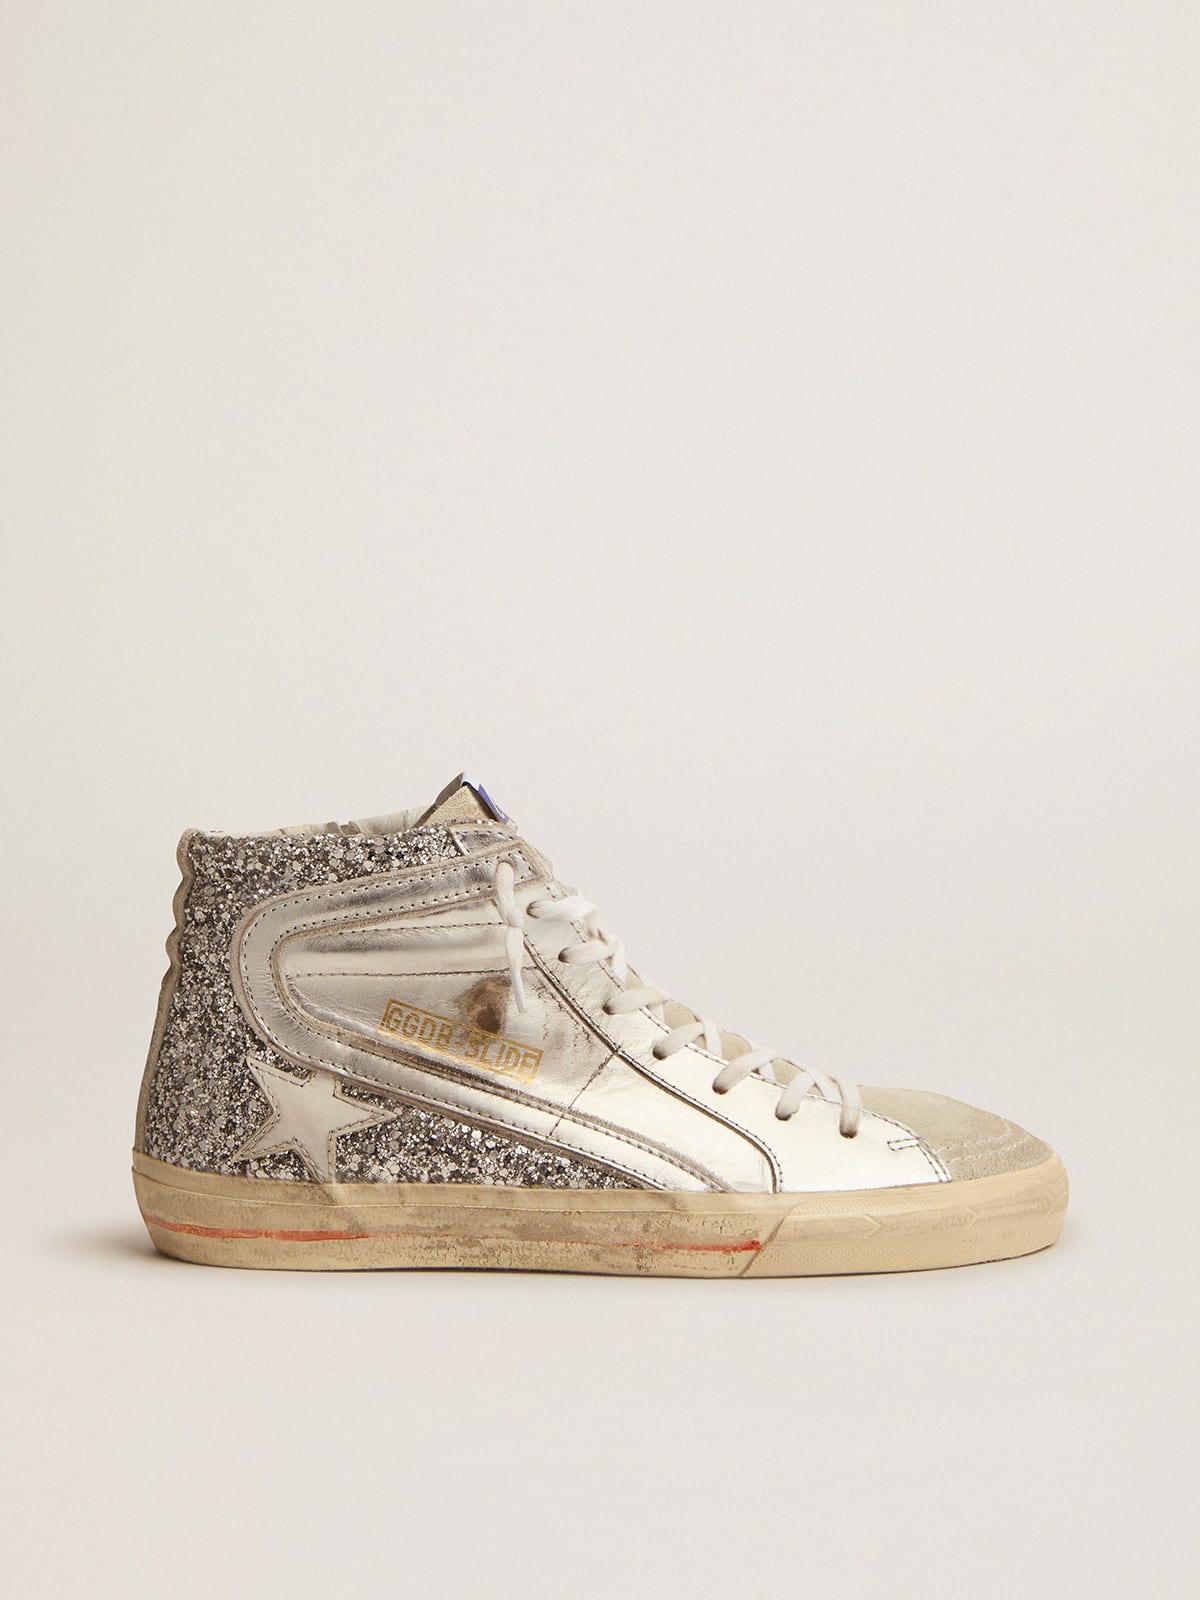 Slide sneakers with upper in laminated leather and silver glitter 